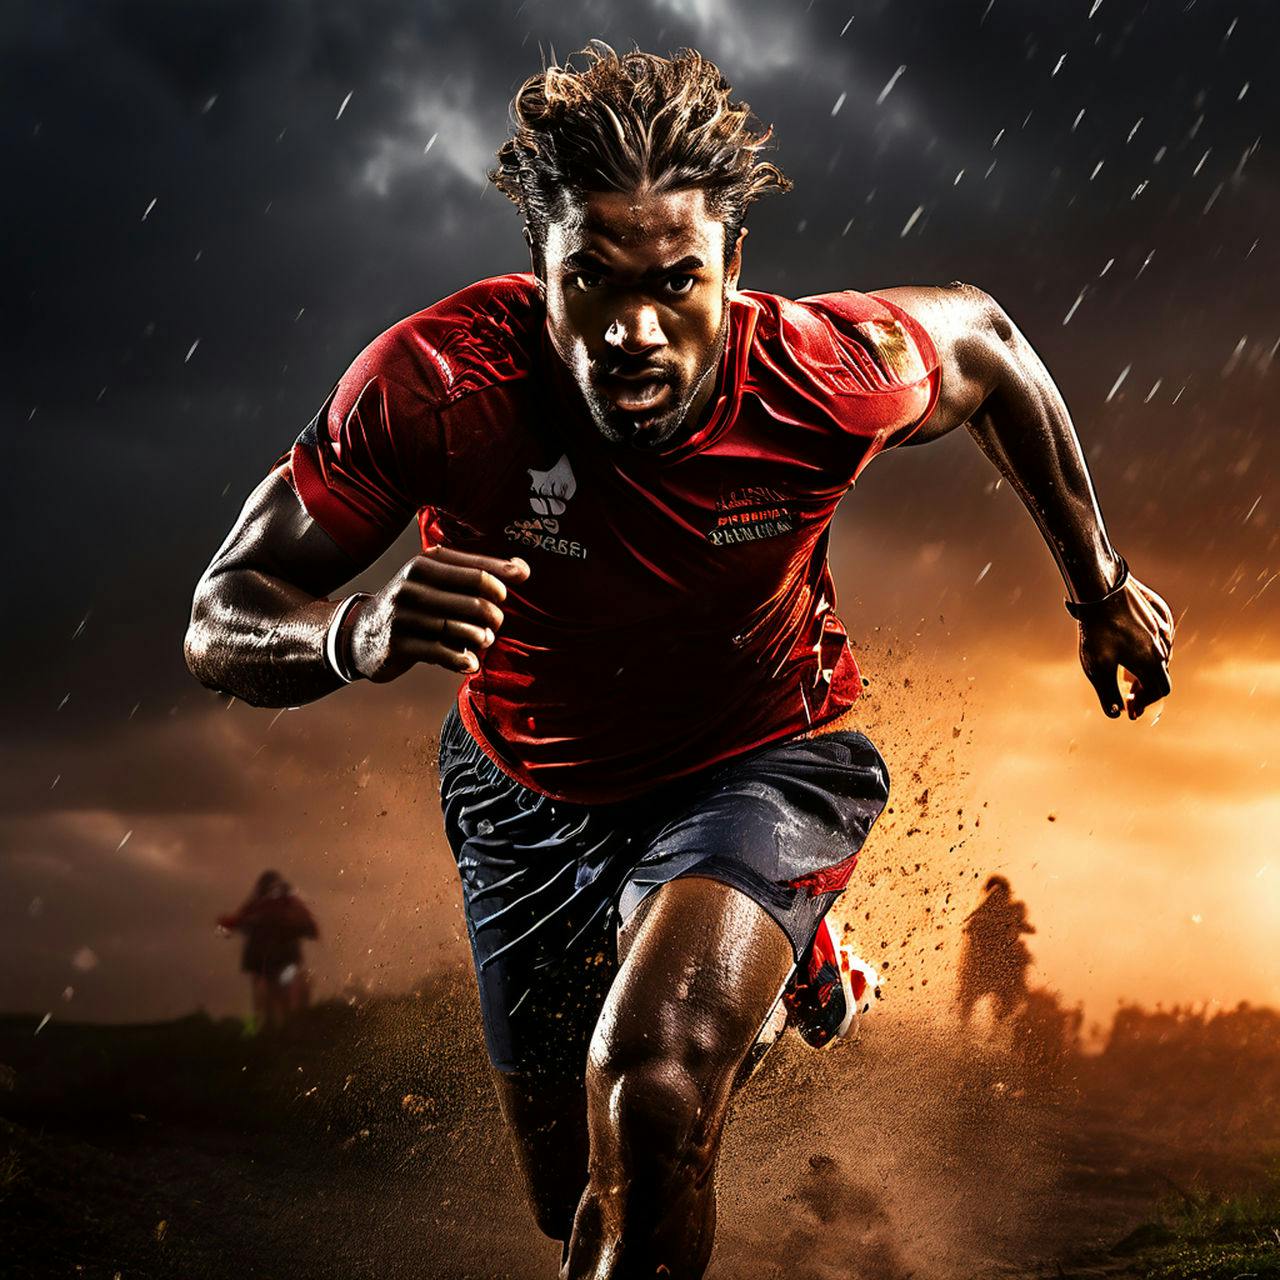 Athlete Sprinting on a Rainy Day with Dramatic Lighting